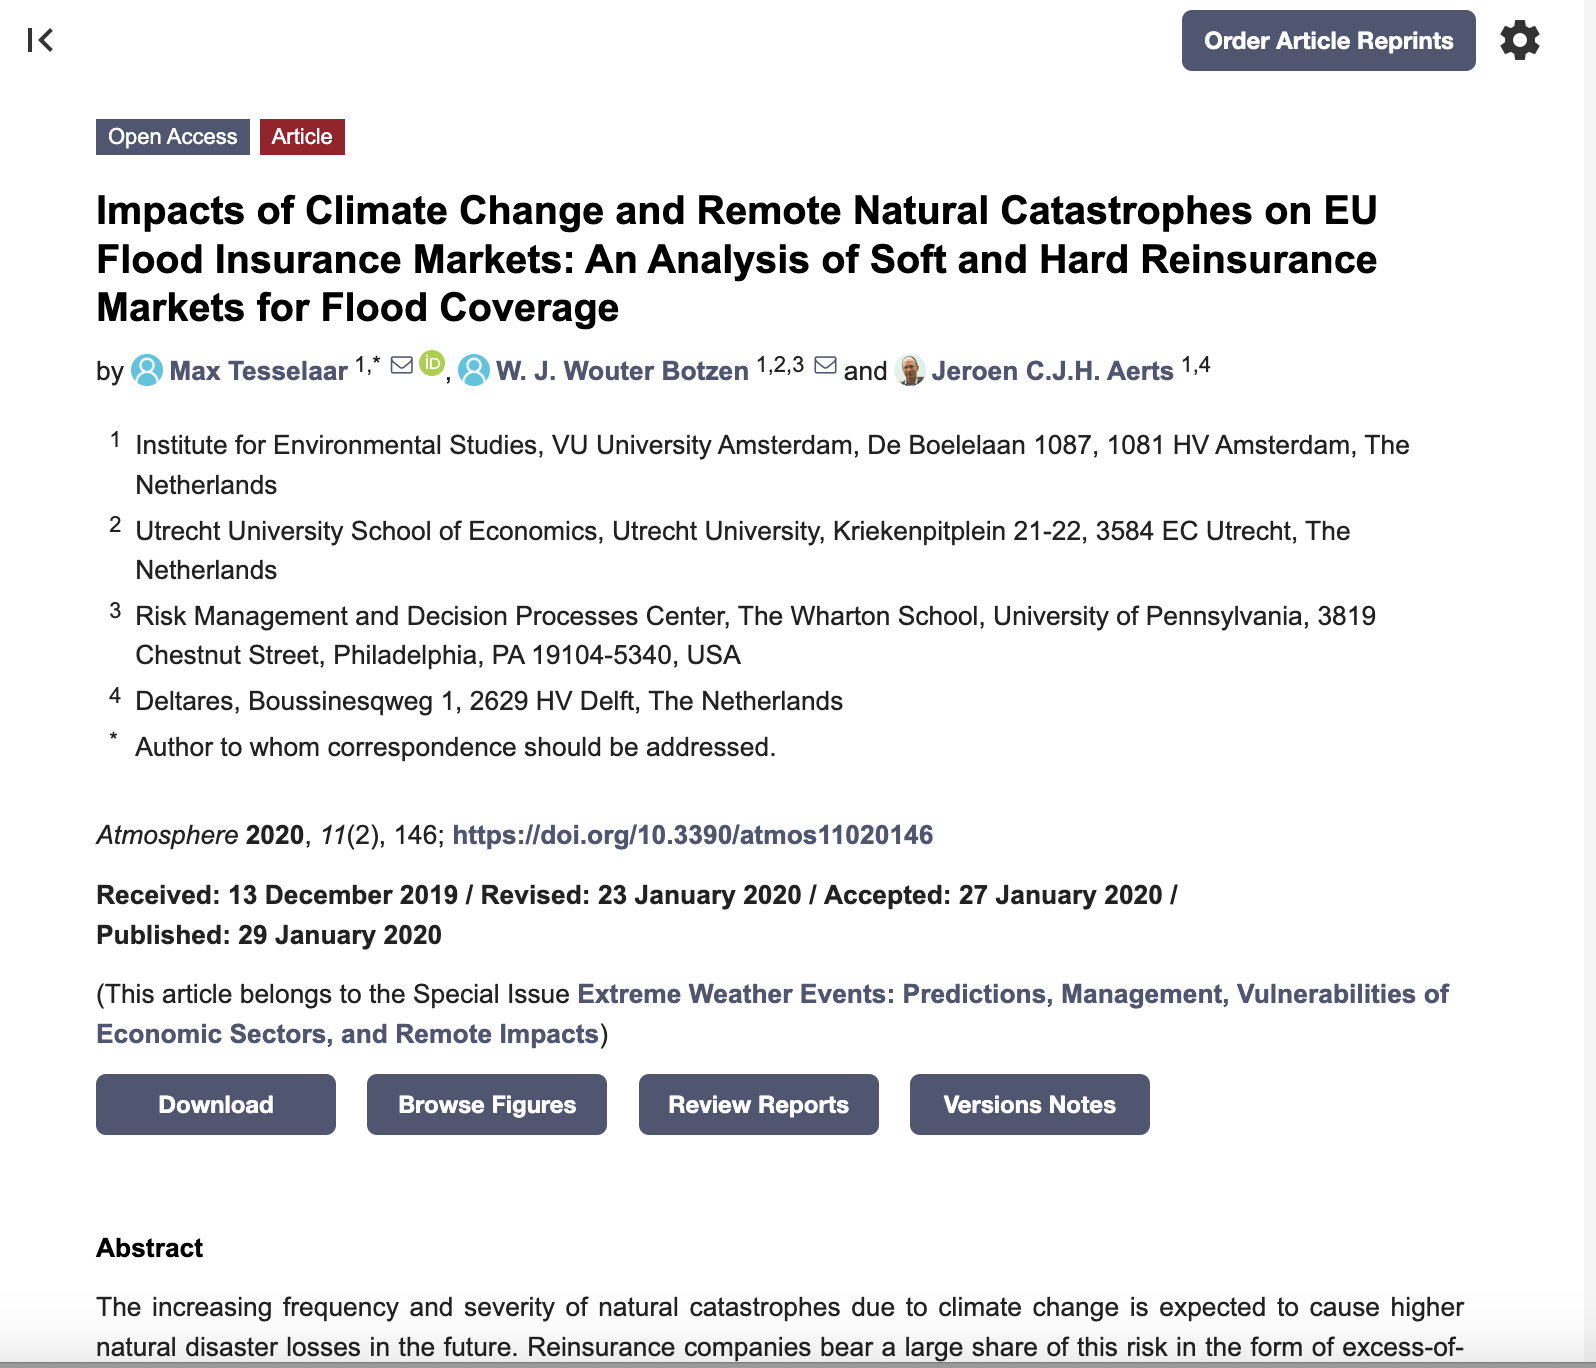 WP4 Financial impacts- Impacts of Climate Change and Remote Natural Catastrophes on EU Flood Insurance Markets: An Analysis of Soft and Hard Reinsurance Markets for Flood Coverage